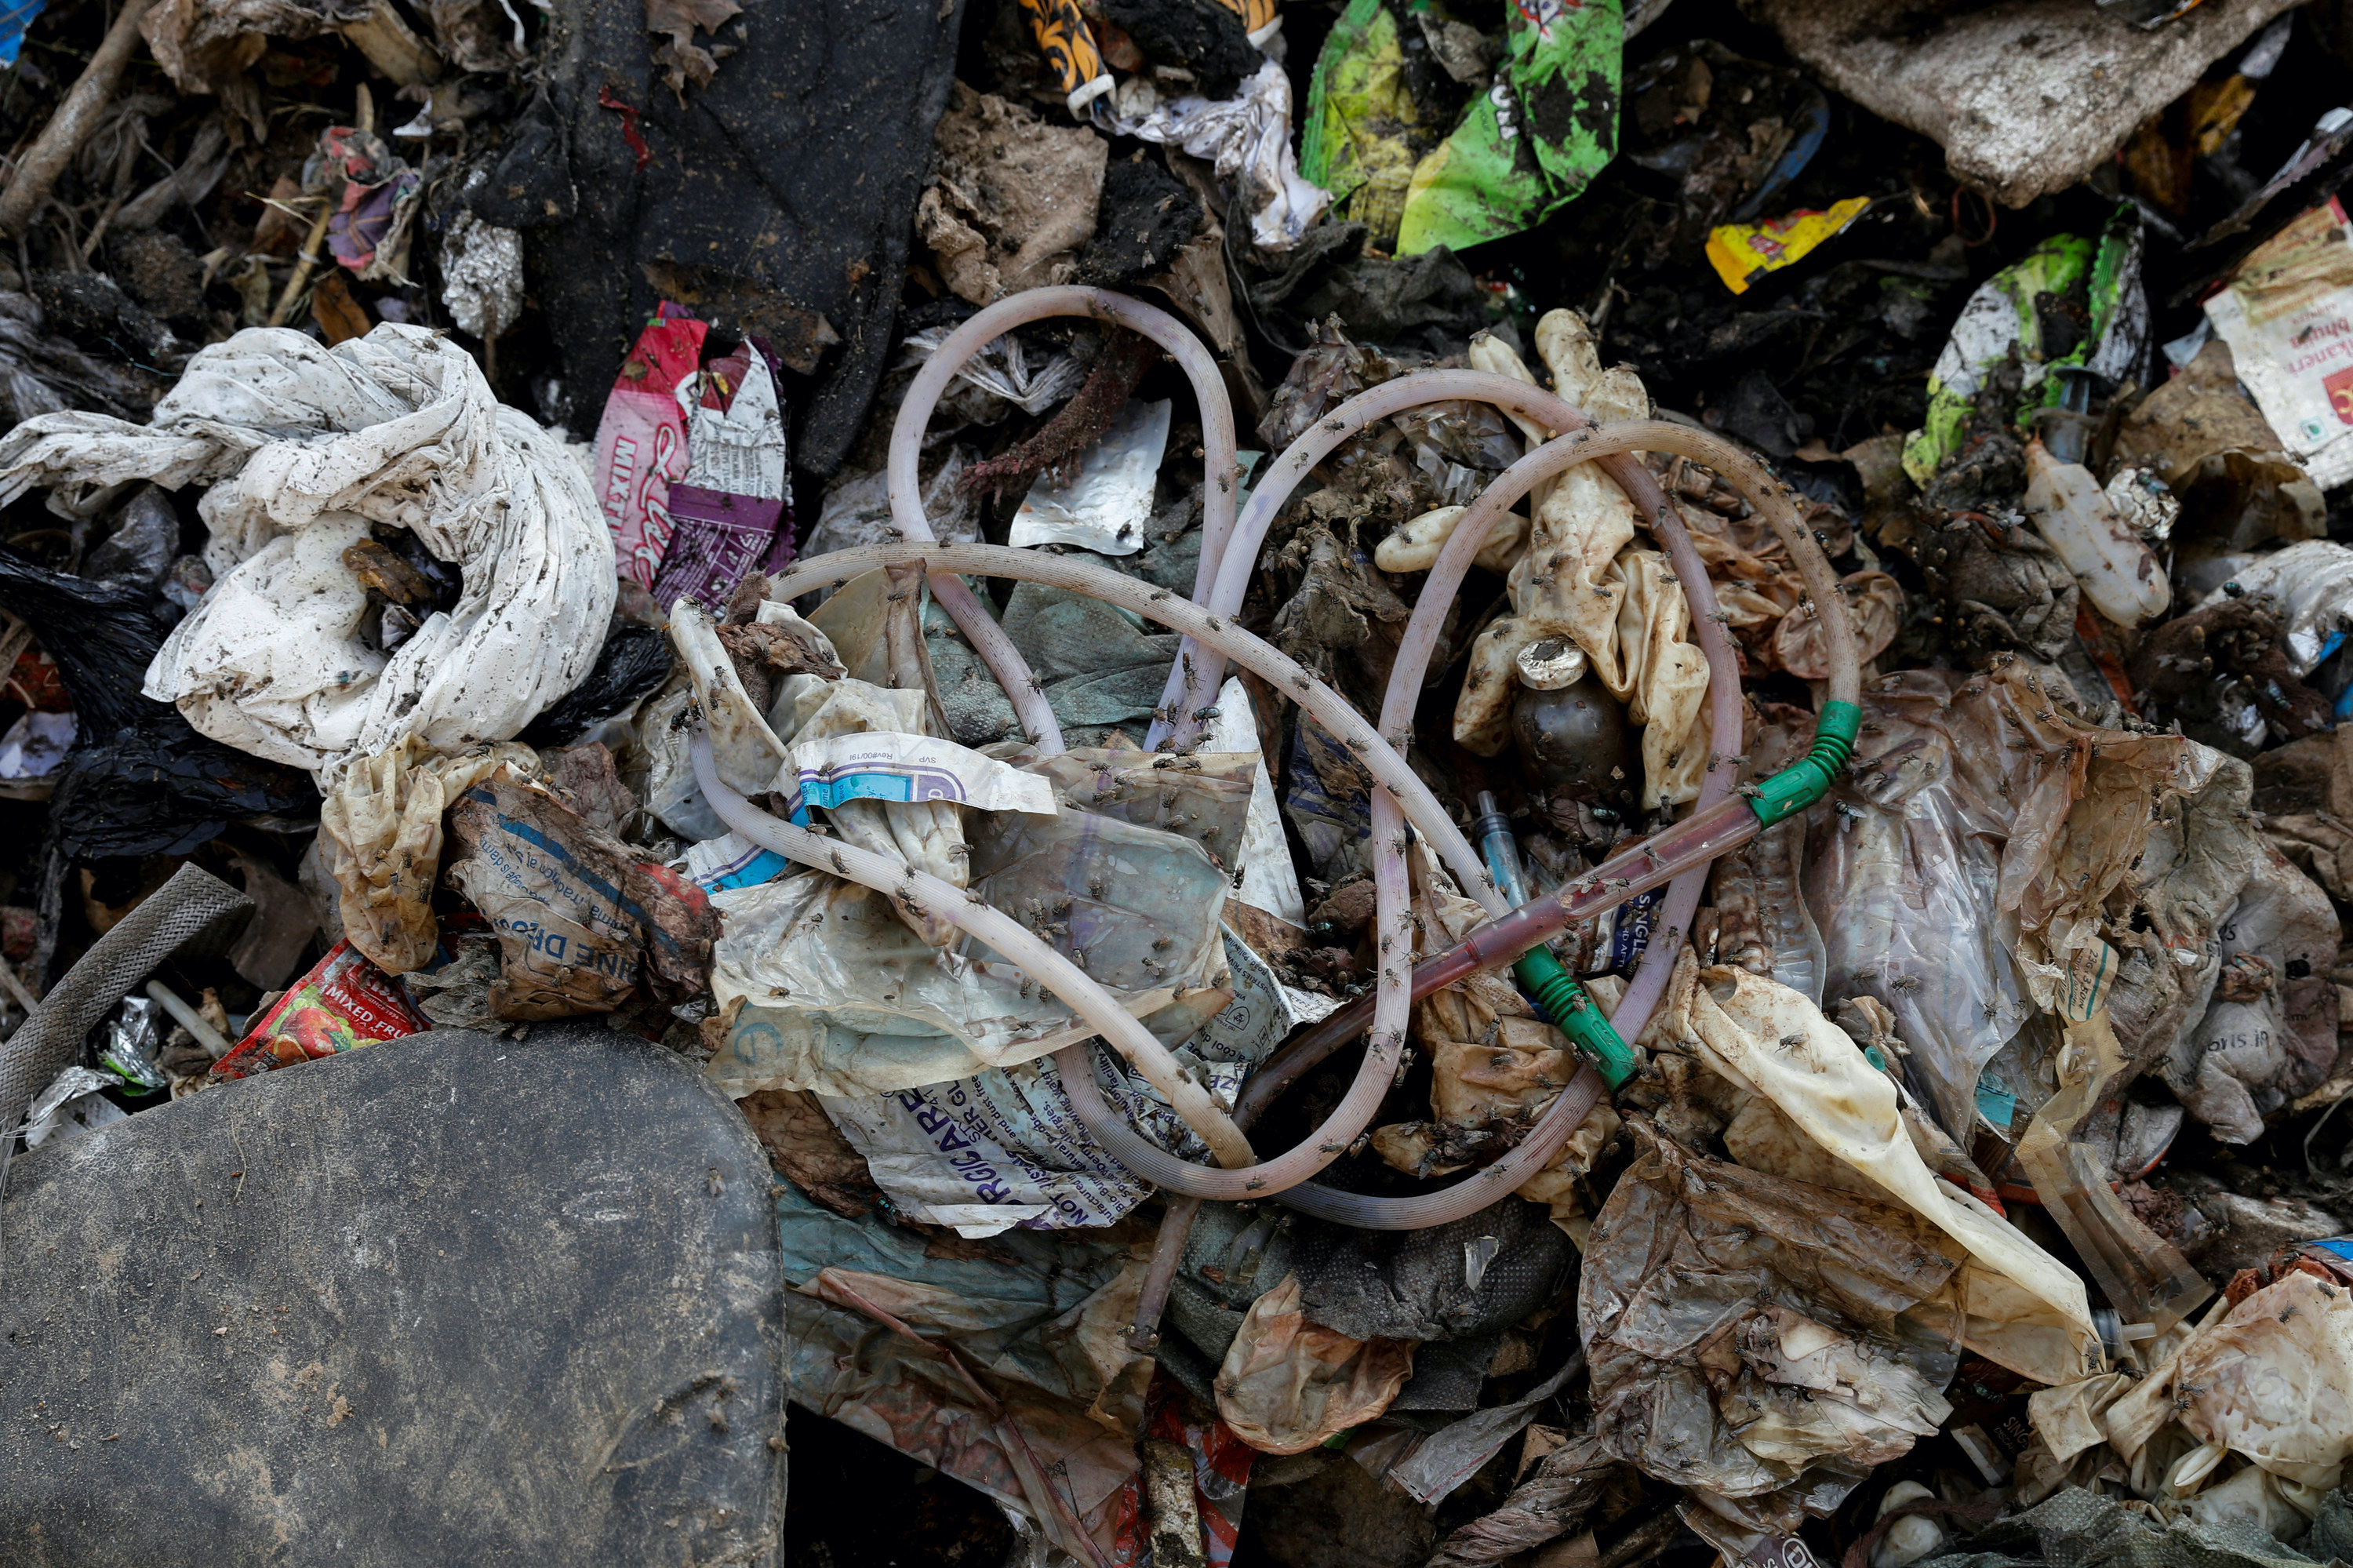 Close up view of medical supplies and waste in a landfill in India